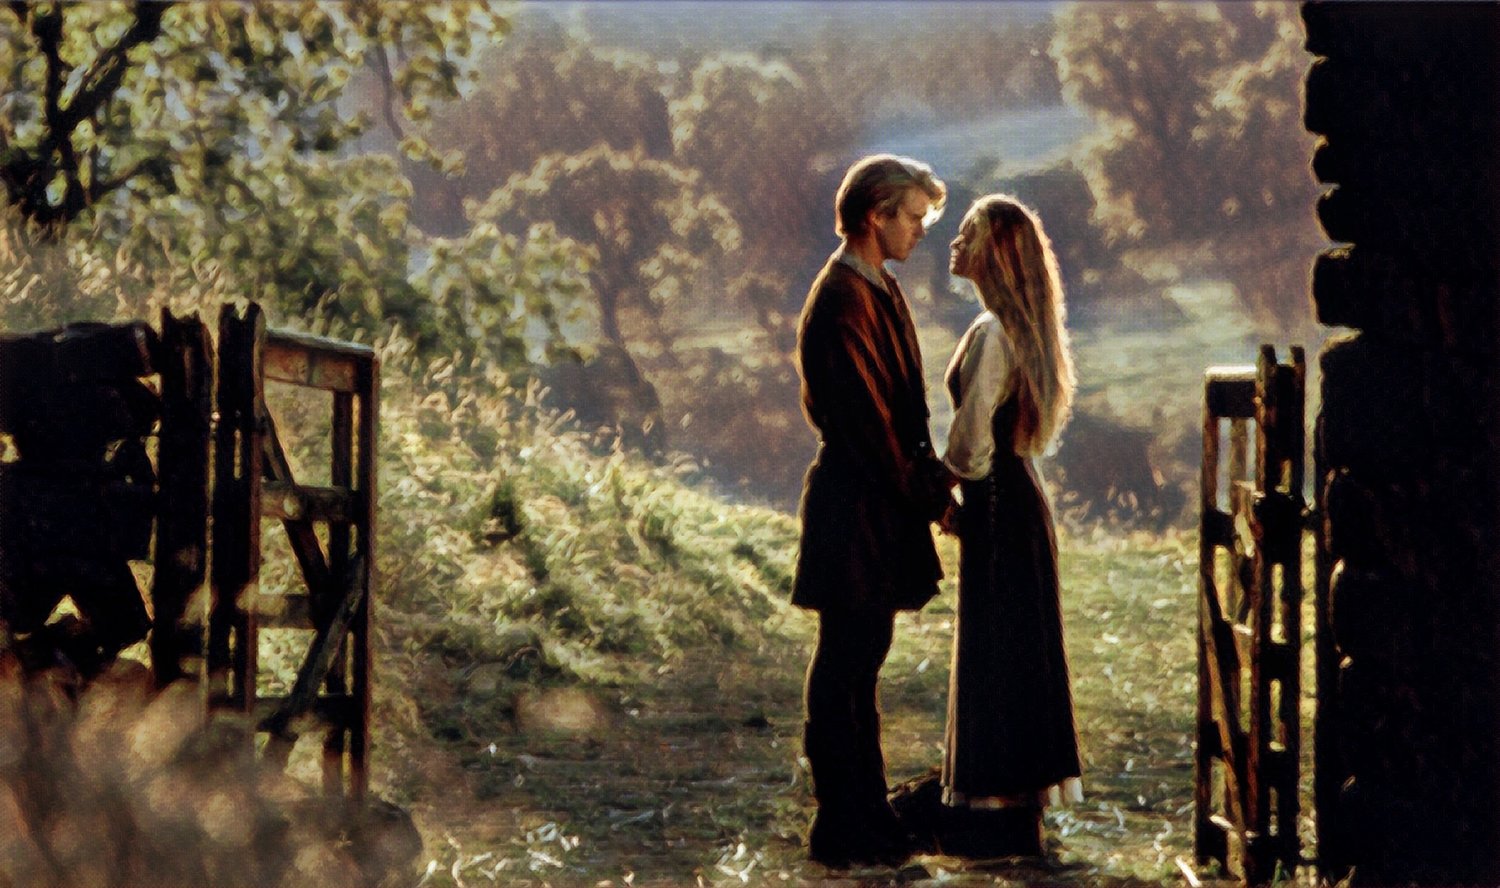 The Princess Bride, minutes 50 to 52